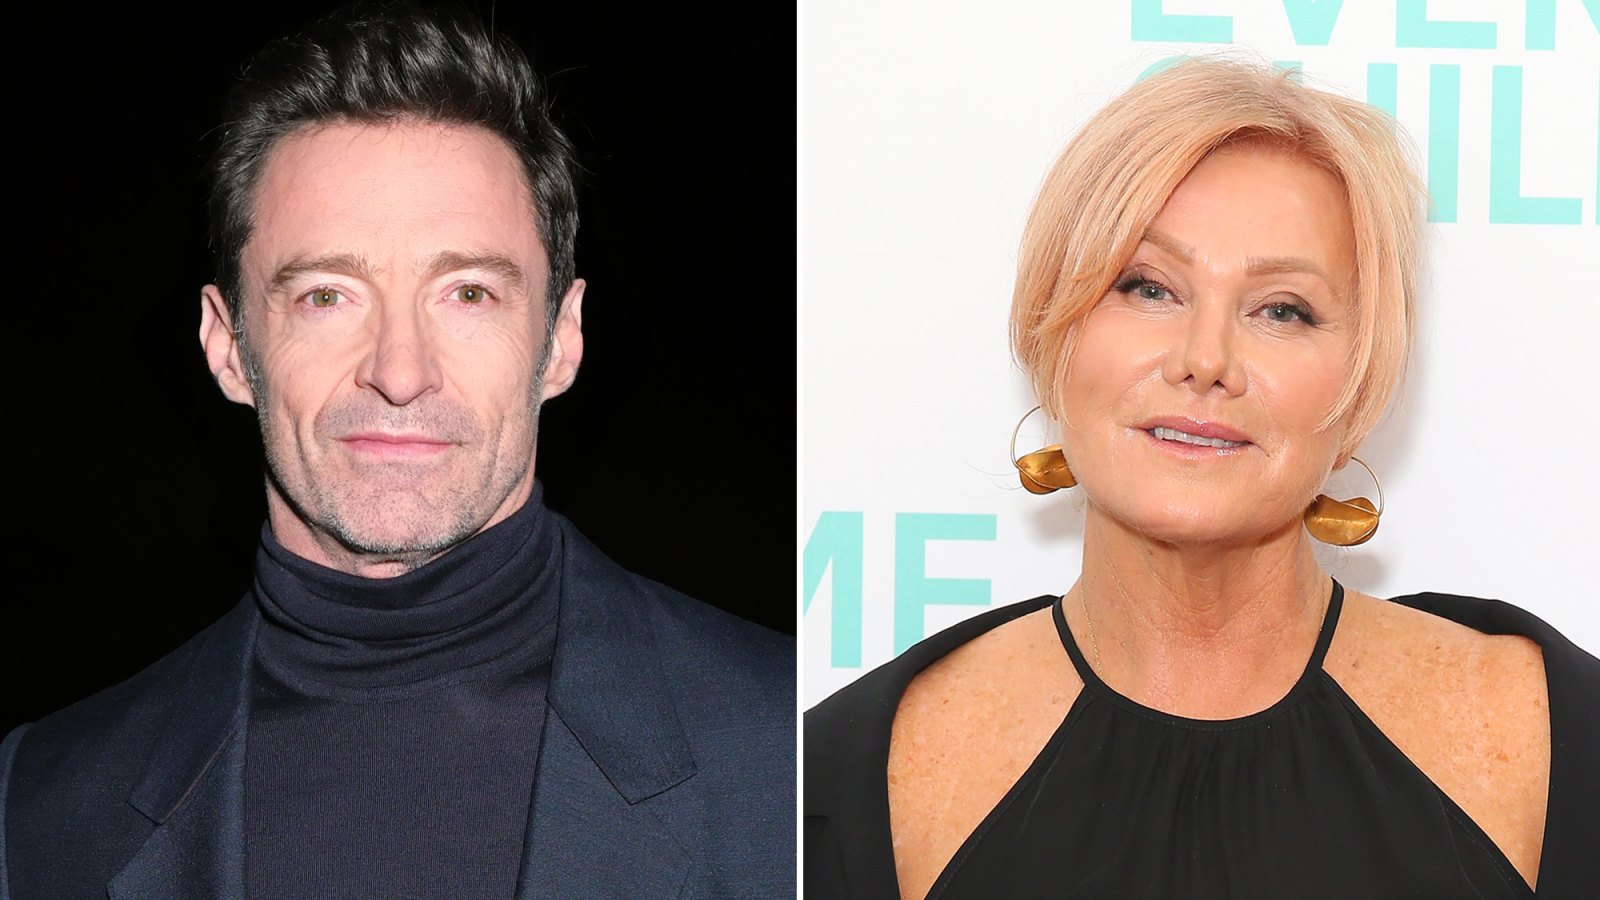 Hugh Jackman Says It's Been a 'Difficult Time' Since Announcing Separation From Deborra-Lee Furness